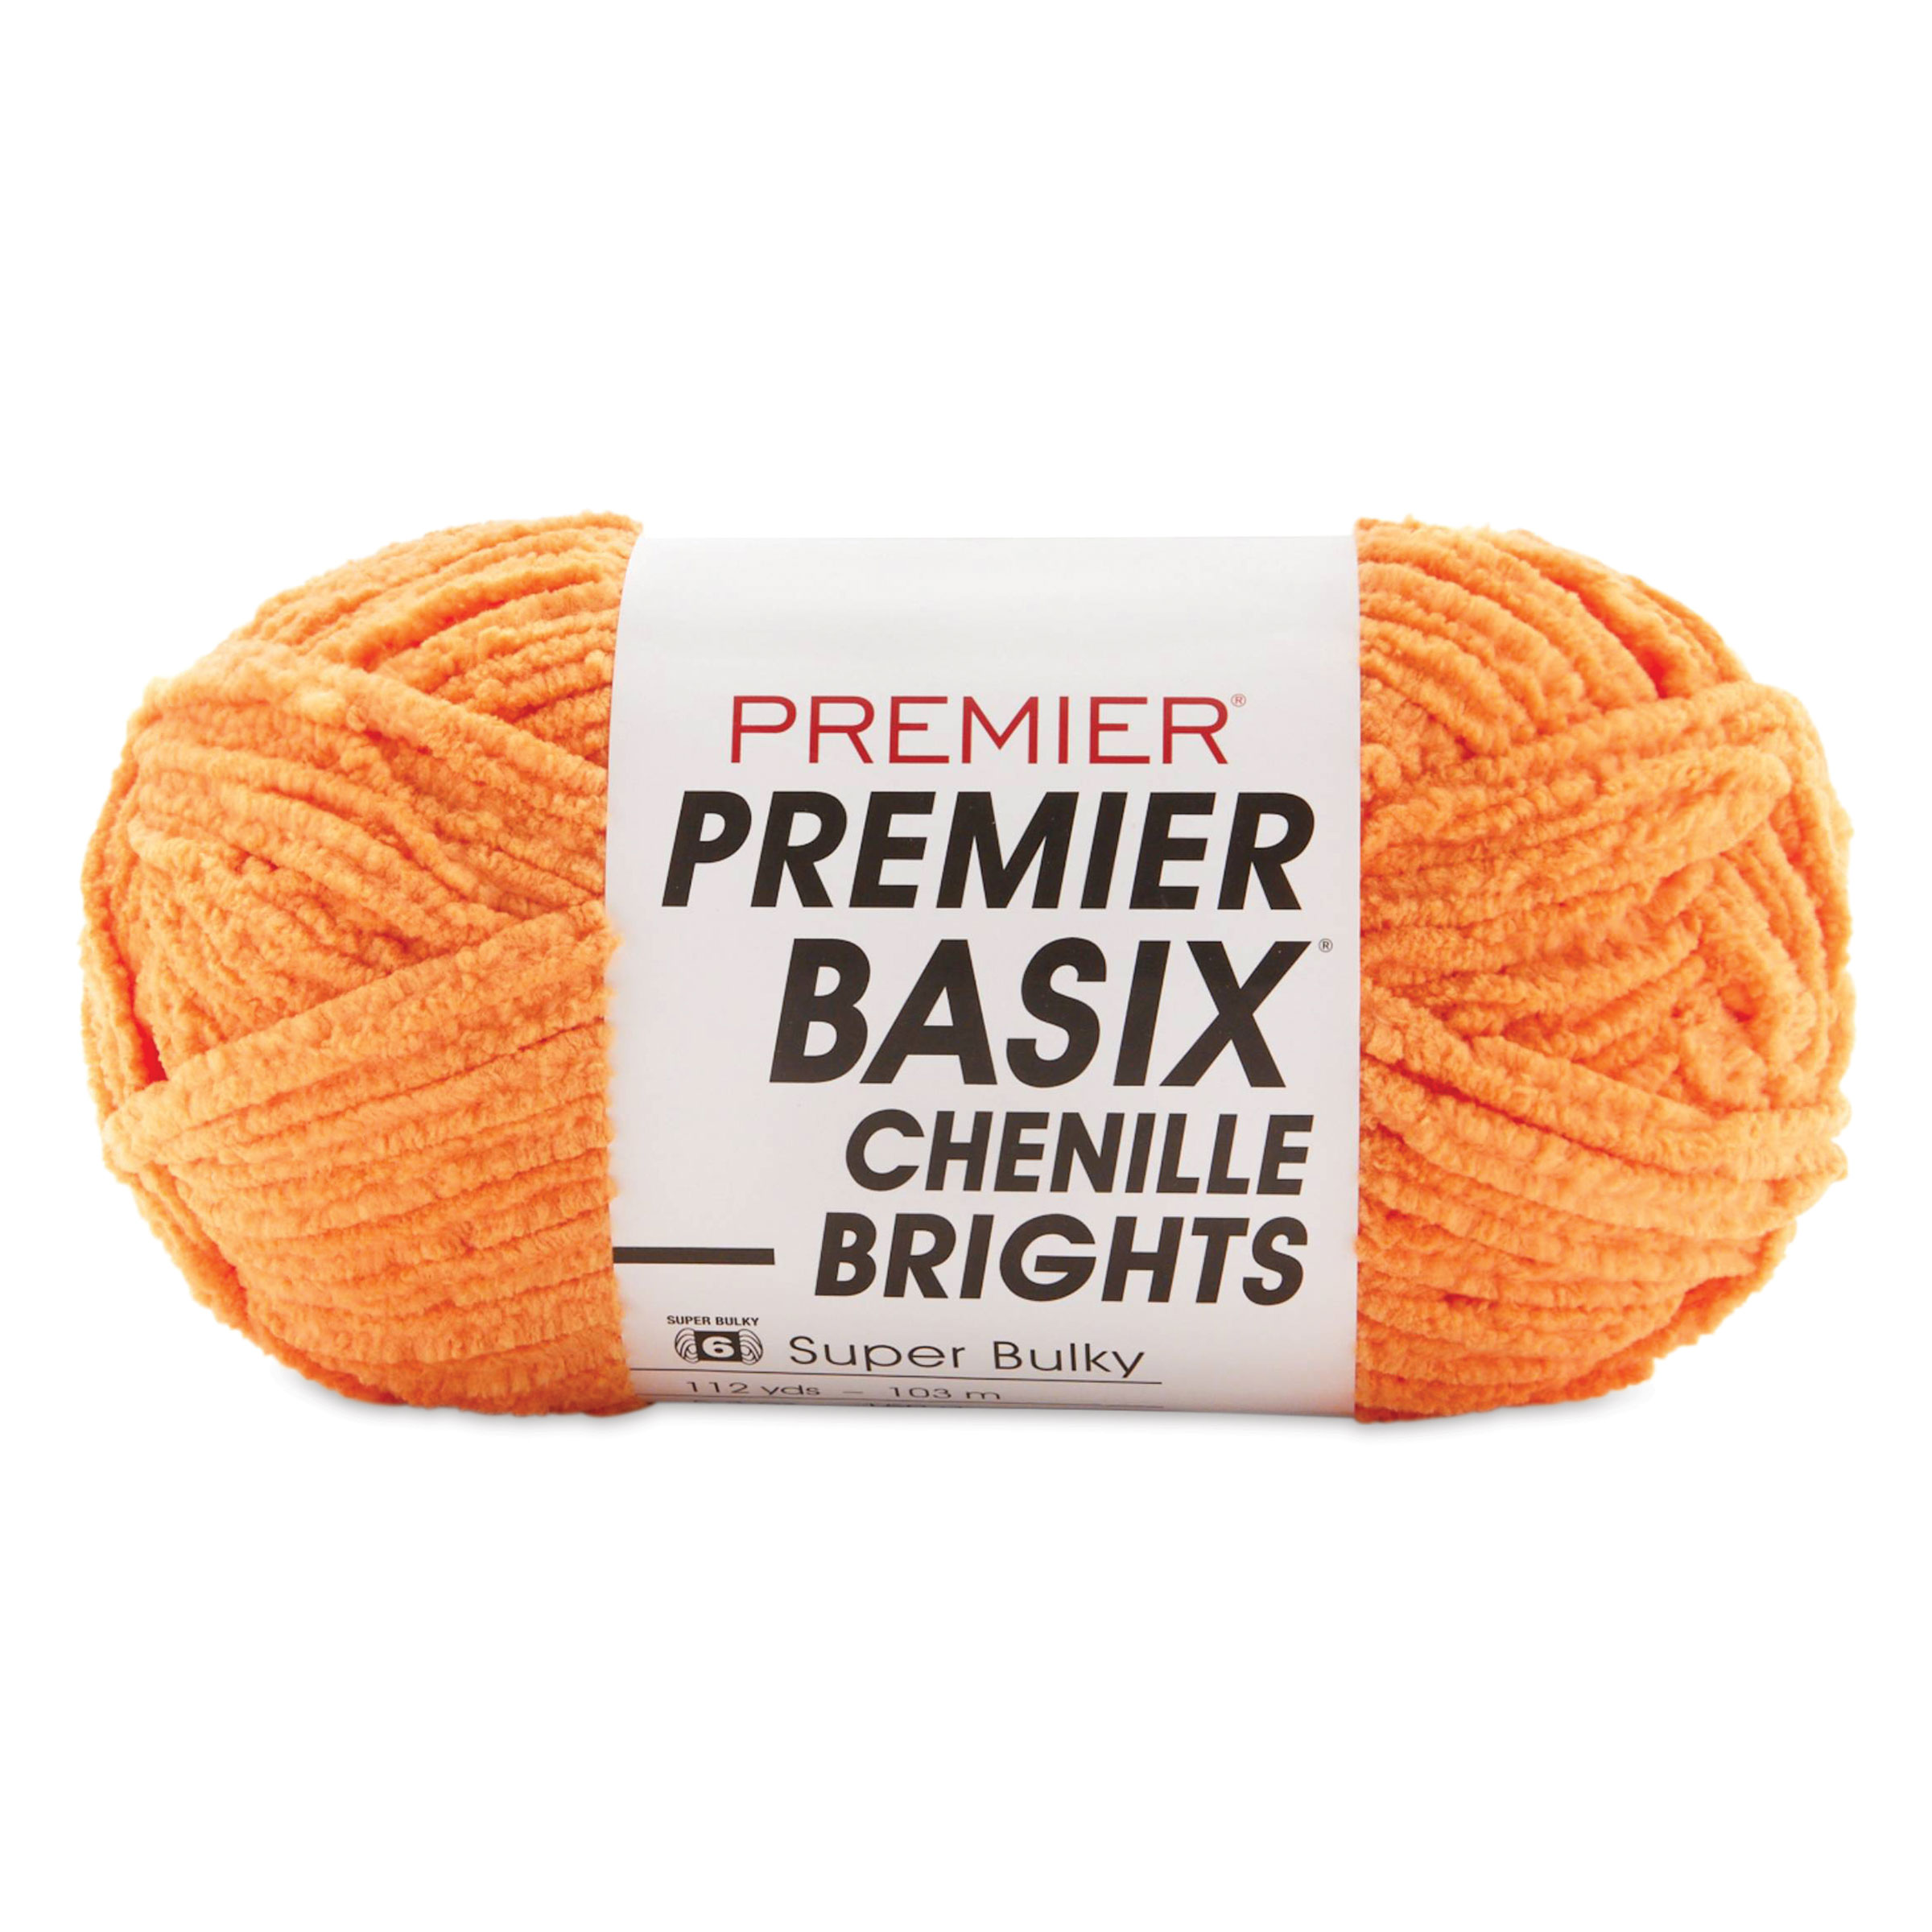 Premier Yarns Basix Chenille Brights Yarn - 5.3 oz - #6 Super Bulky Weight - 3 Pack Bundle with Bella's Crafts Stitch Markers (White)